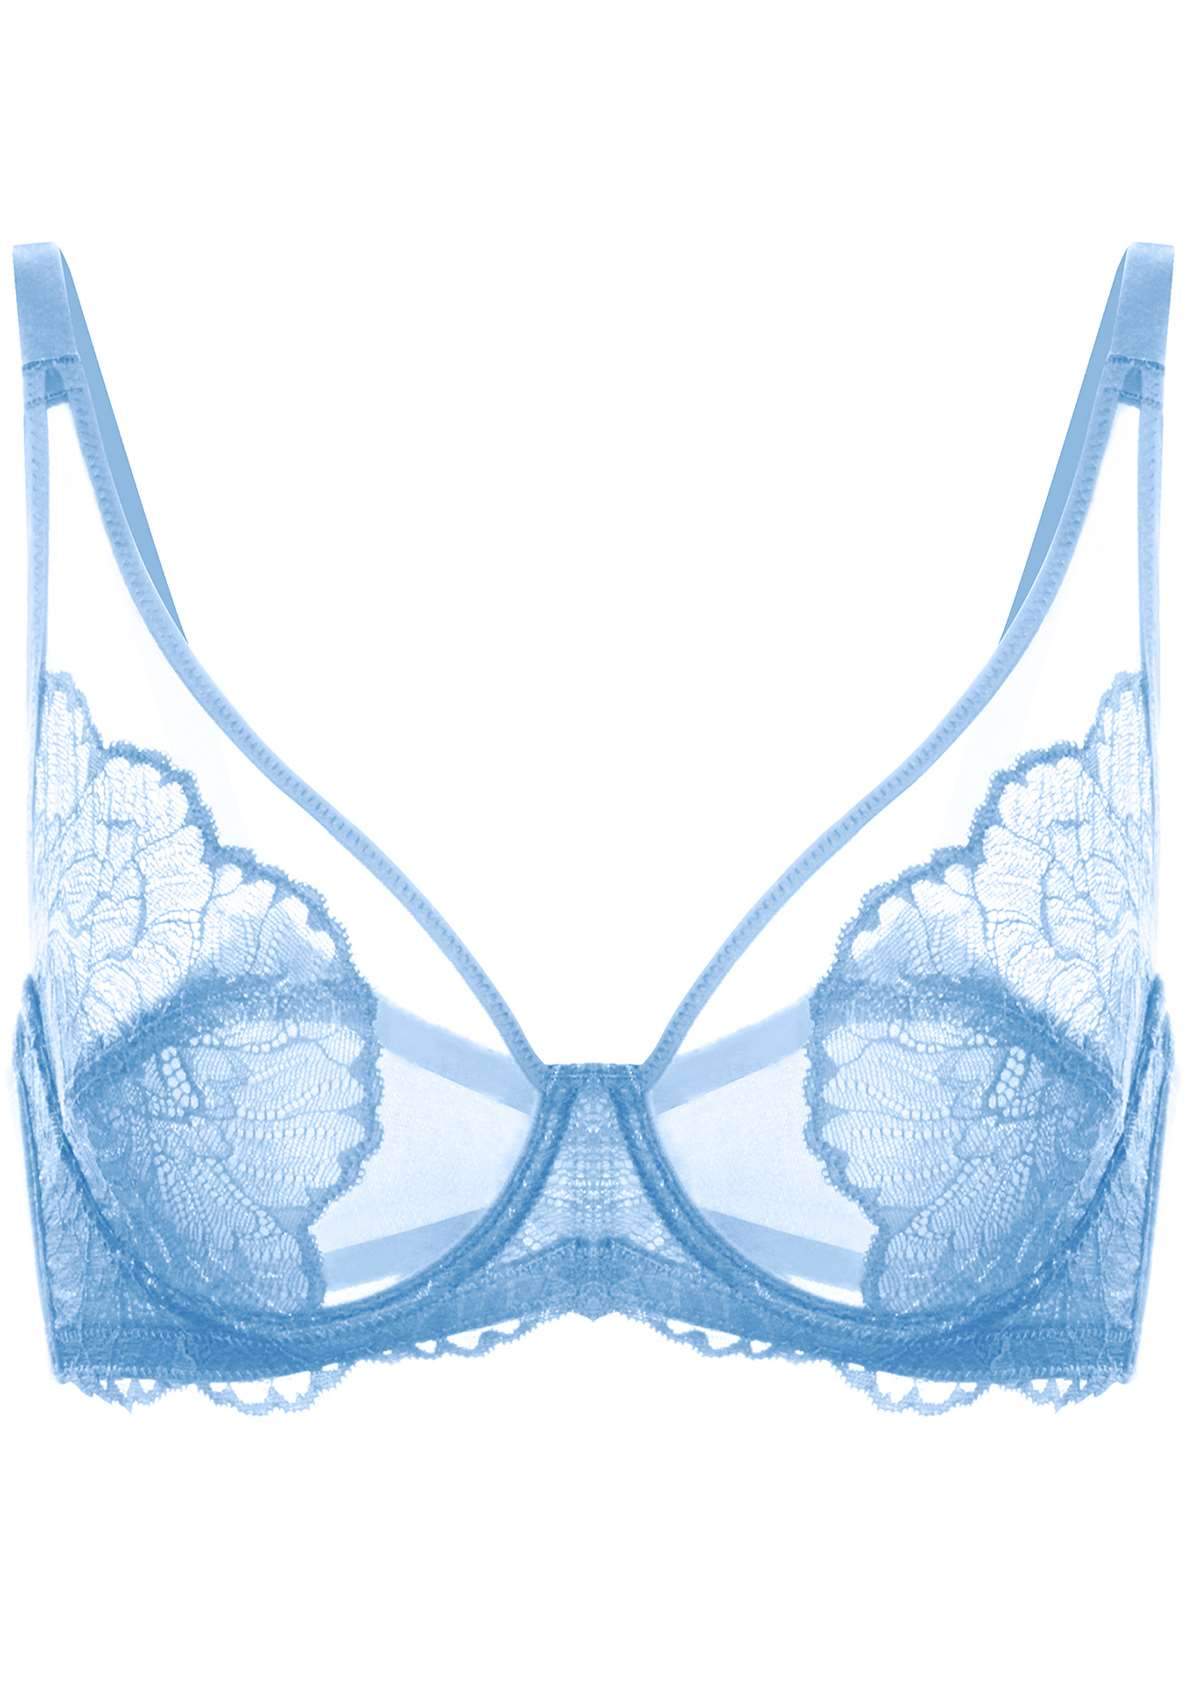 HSIA Blossom Full Coverage Supportive Unlined Underwire Bra Set - Storm Blue / 34 / DDD/F